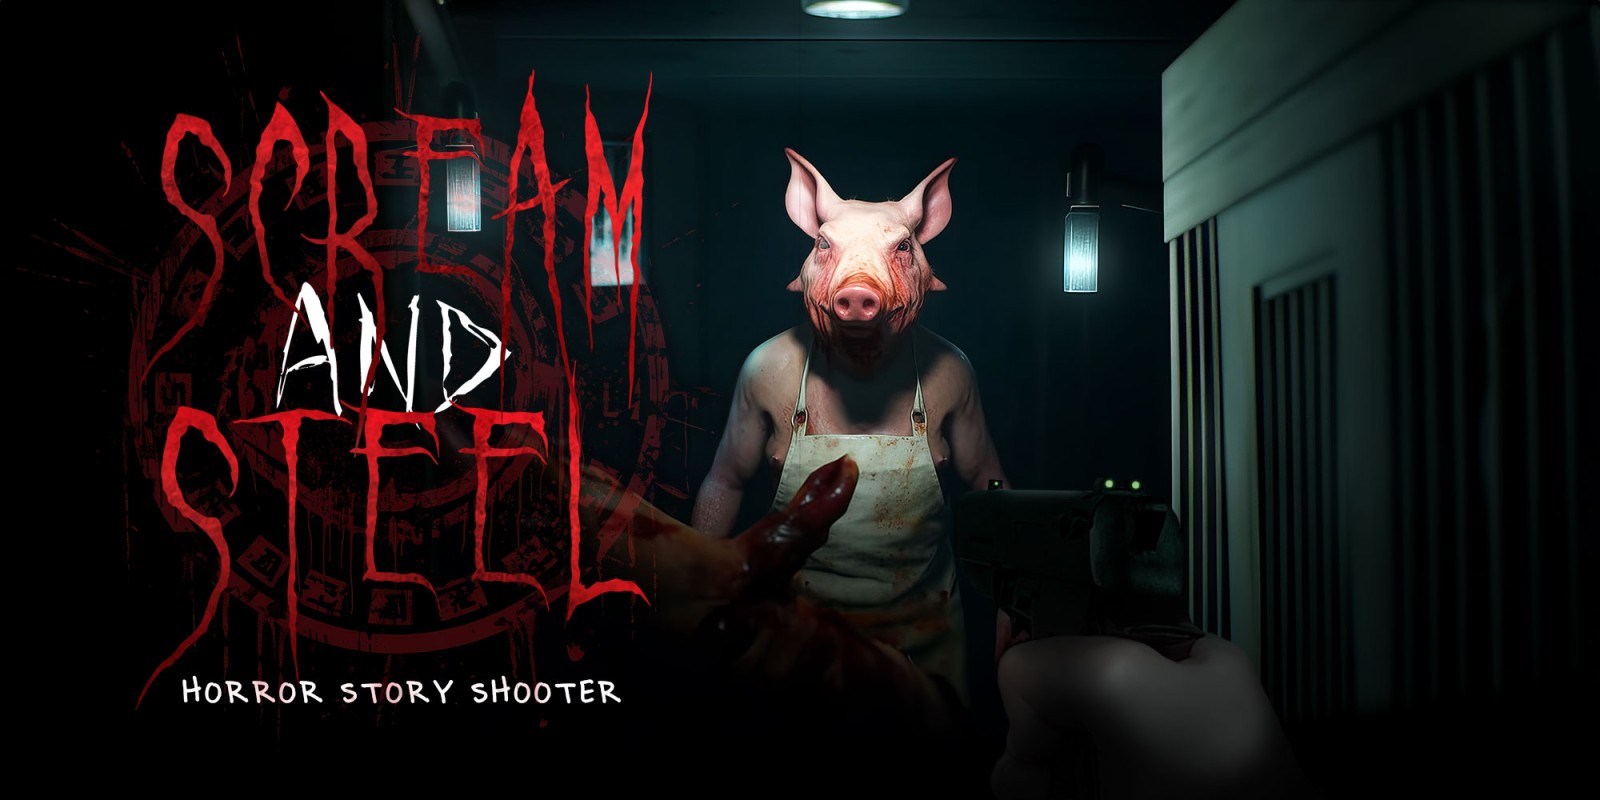 SCREAM AND STEEL - Horror Story Shooter